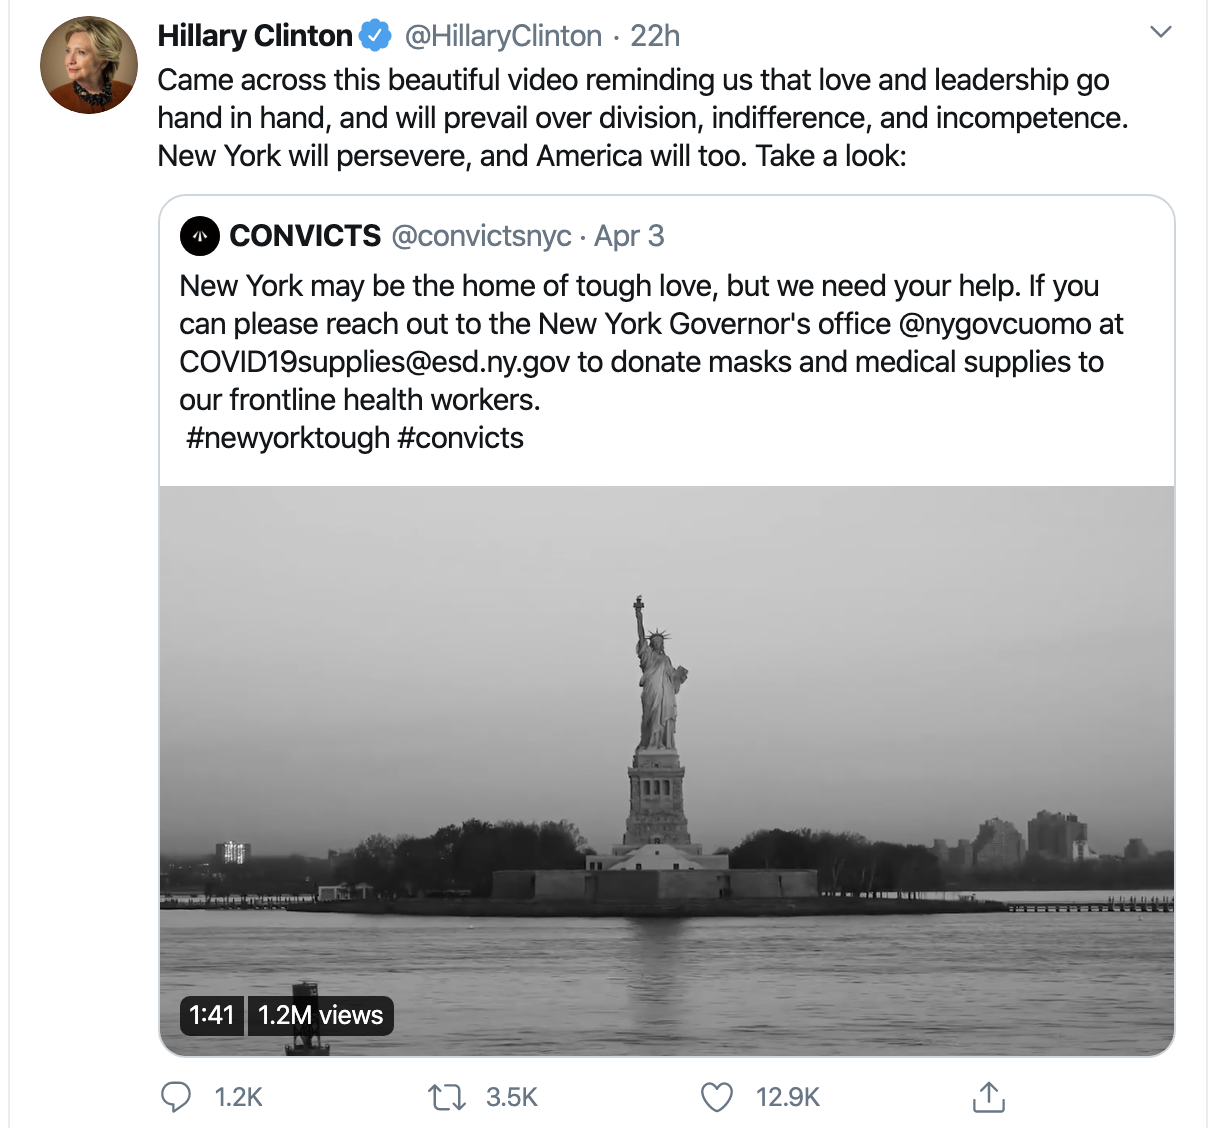 Screen-Shot-2020-04-05-at-10.46.21-AM Hillary Clinton Returns With Inspirational Coronavirus Response Video For America Featured Healthcare Hillary Clinton Politics Top Stories 